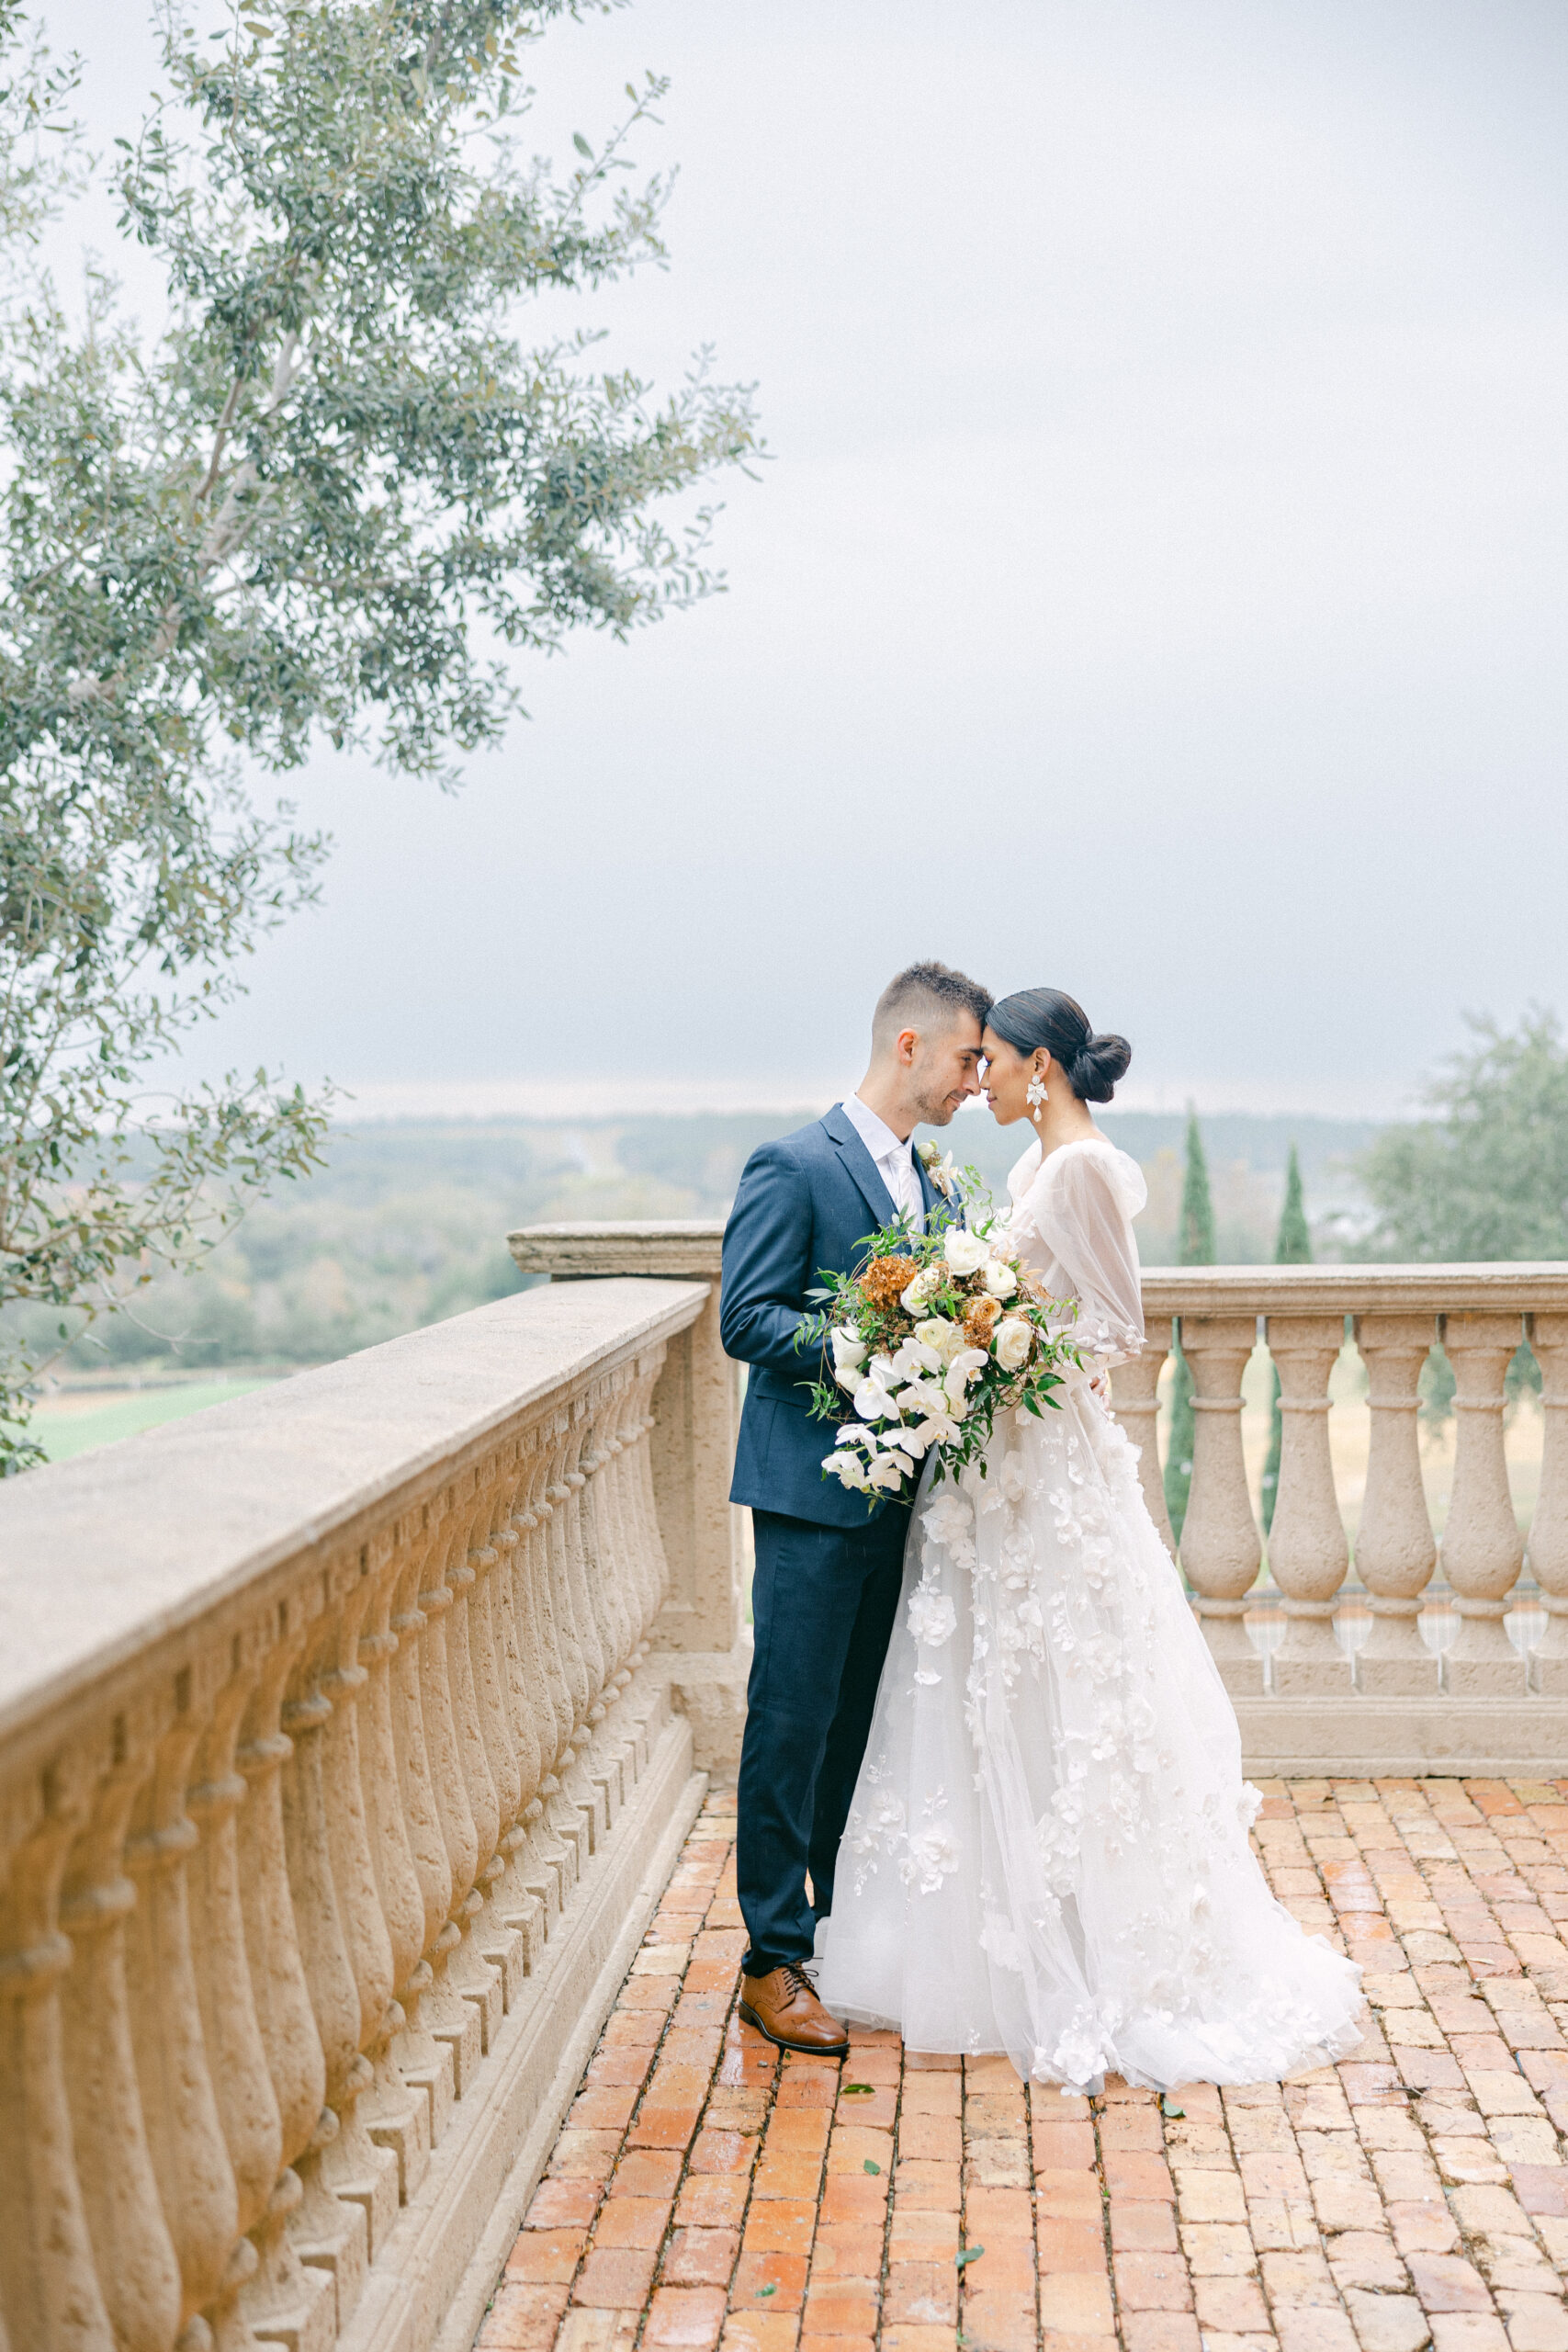 Groom leaning his face into the bride wearing a Heathered Navy winter wedding suit on the balcony